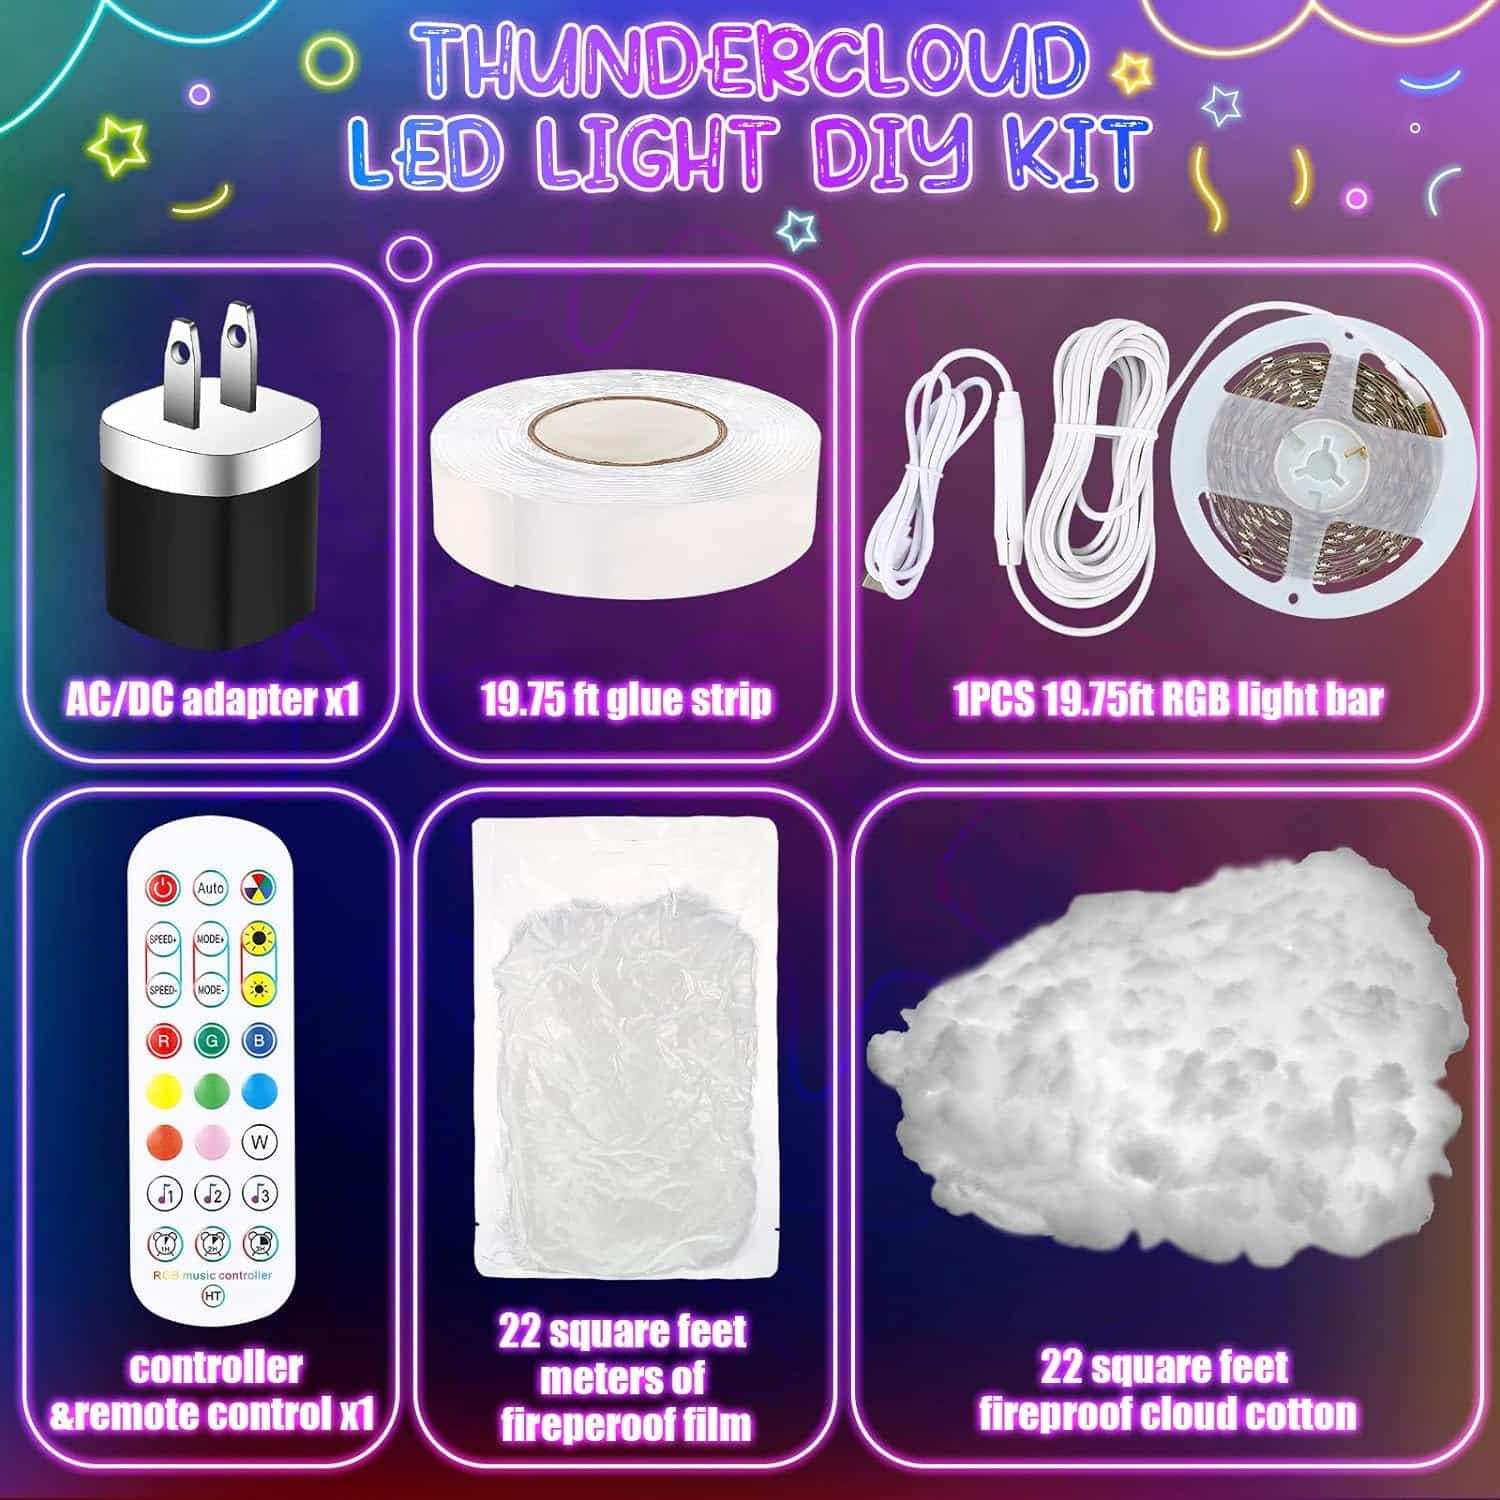 3D Thundercloud LED Light Kit Cotton Cloud Music Sync Multicolor Changing Strip Light Atmosphere DIY Creative Thunder Cloud Lamp Wall Ceiling Light for Bedroom Gaming Room Party (1 Pcs, 16 Ft)